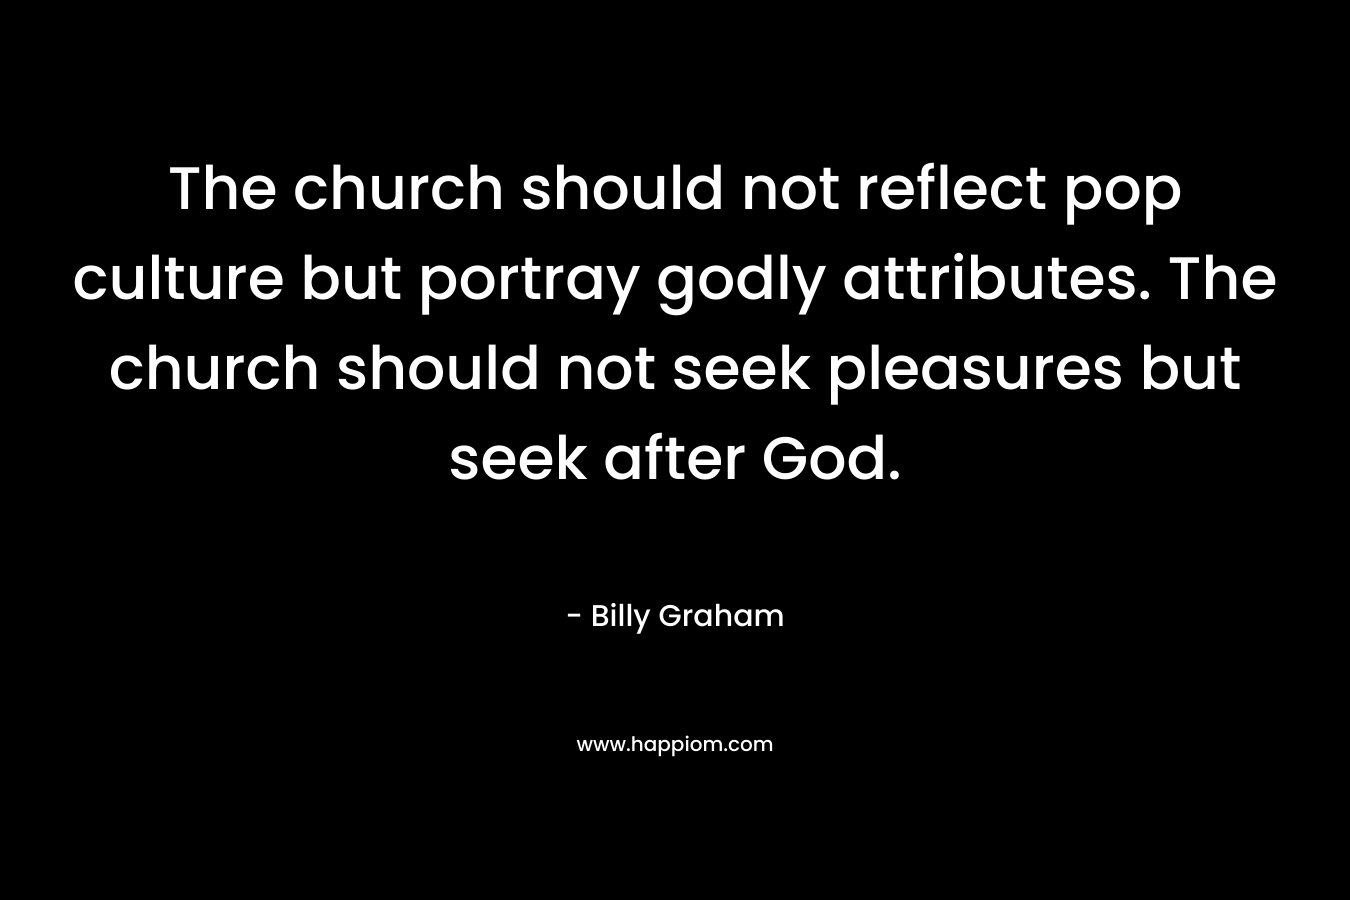 The church should not reflect pop culture but portray godly attributes. The church should not seek pleasures but seek after God. – Billy Graham